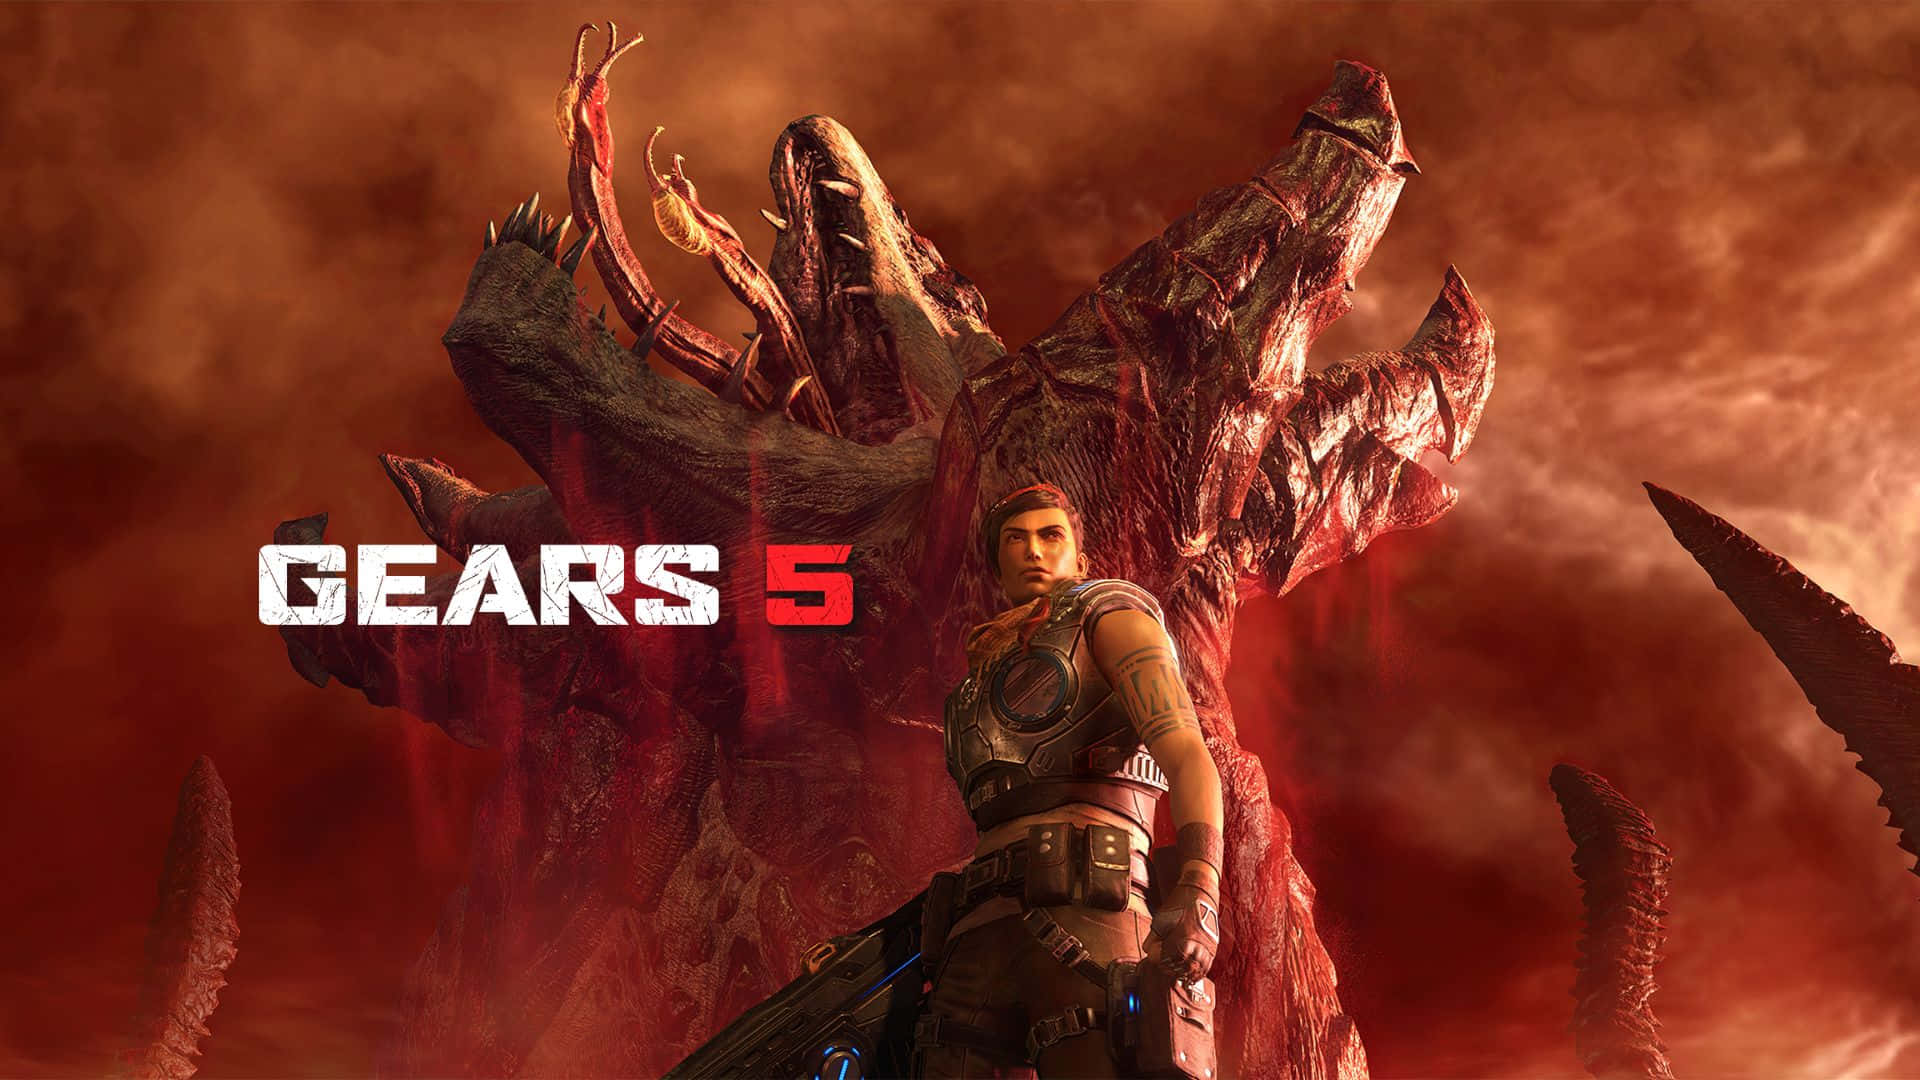 Fight your way to victory in Gears of War 5